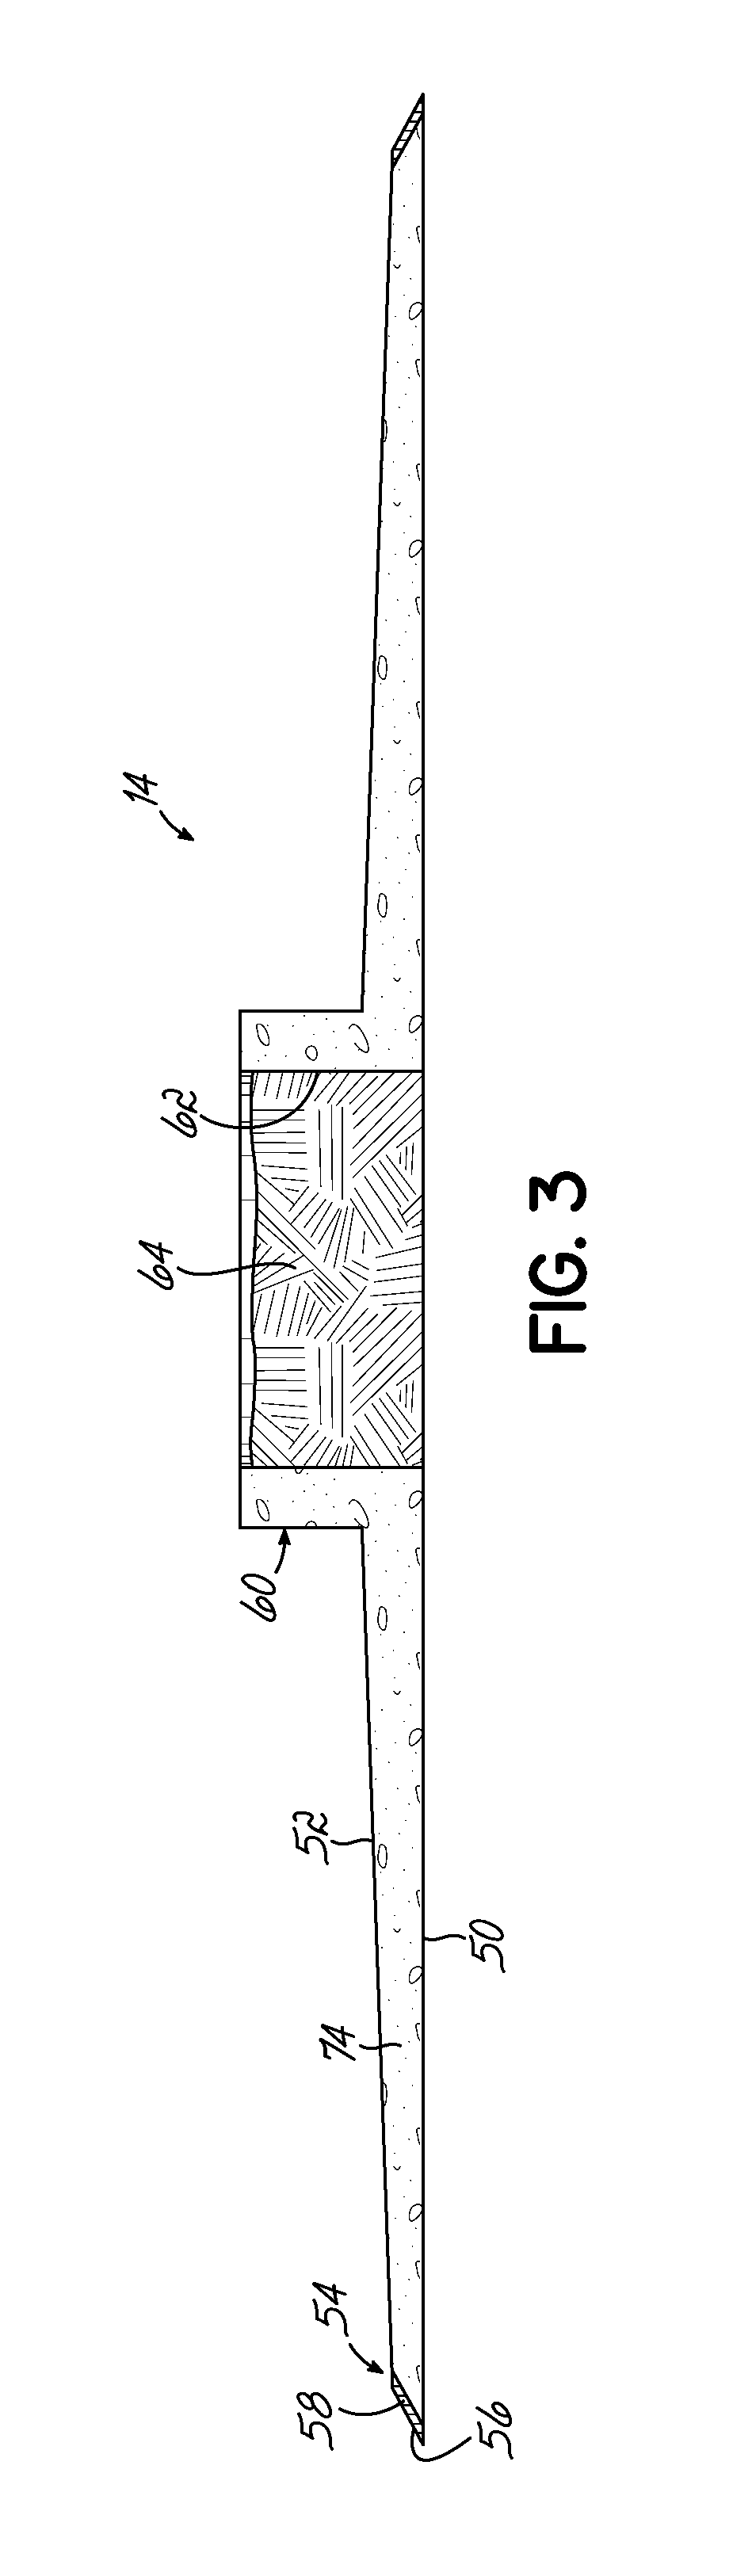 Systems for converting an existing traffic intersection into an intersection having a roundabout, and related methods